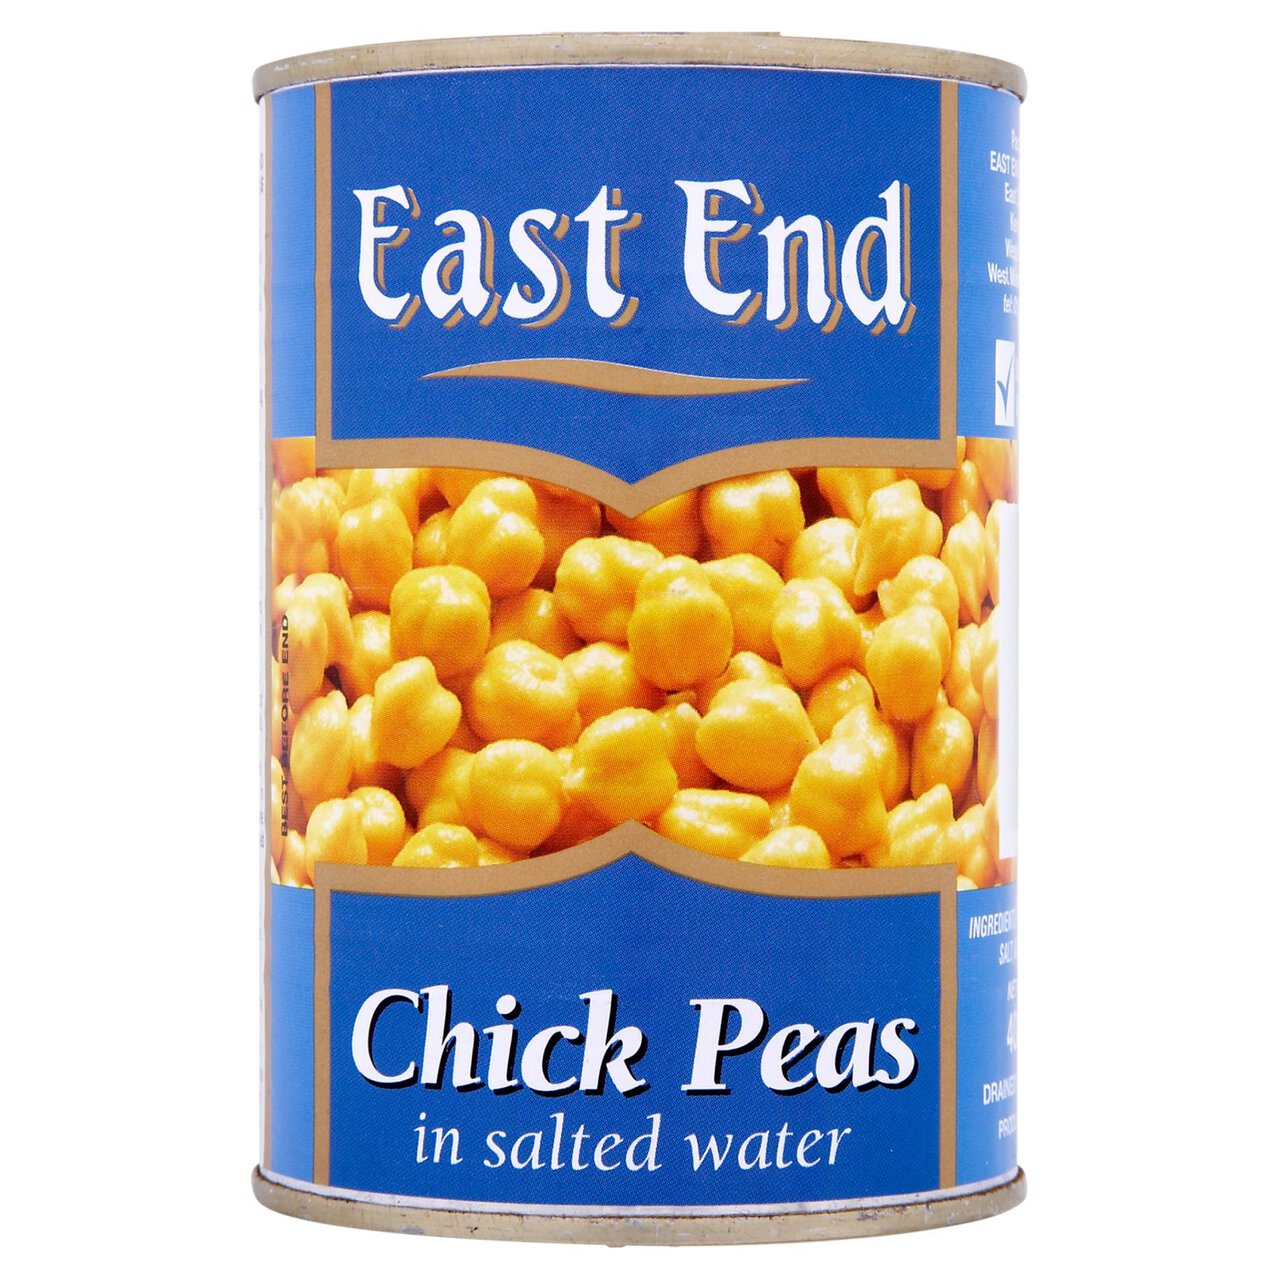 East End Chick Peas In Salted Water 400g